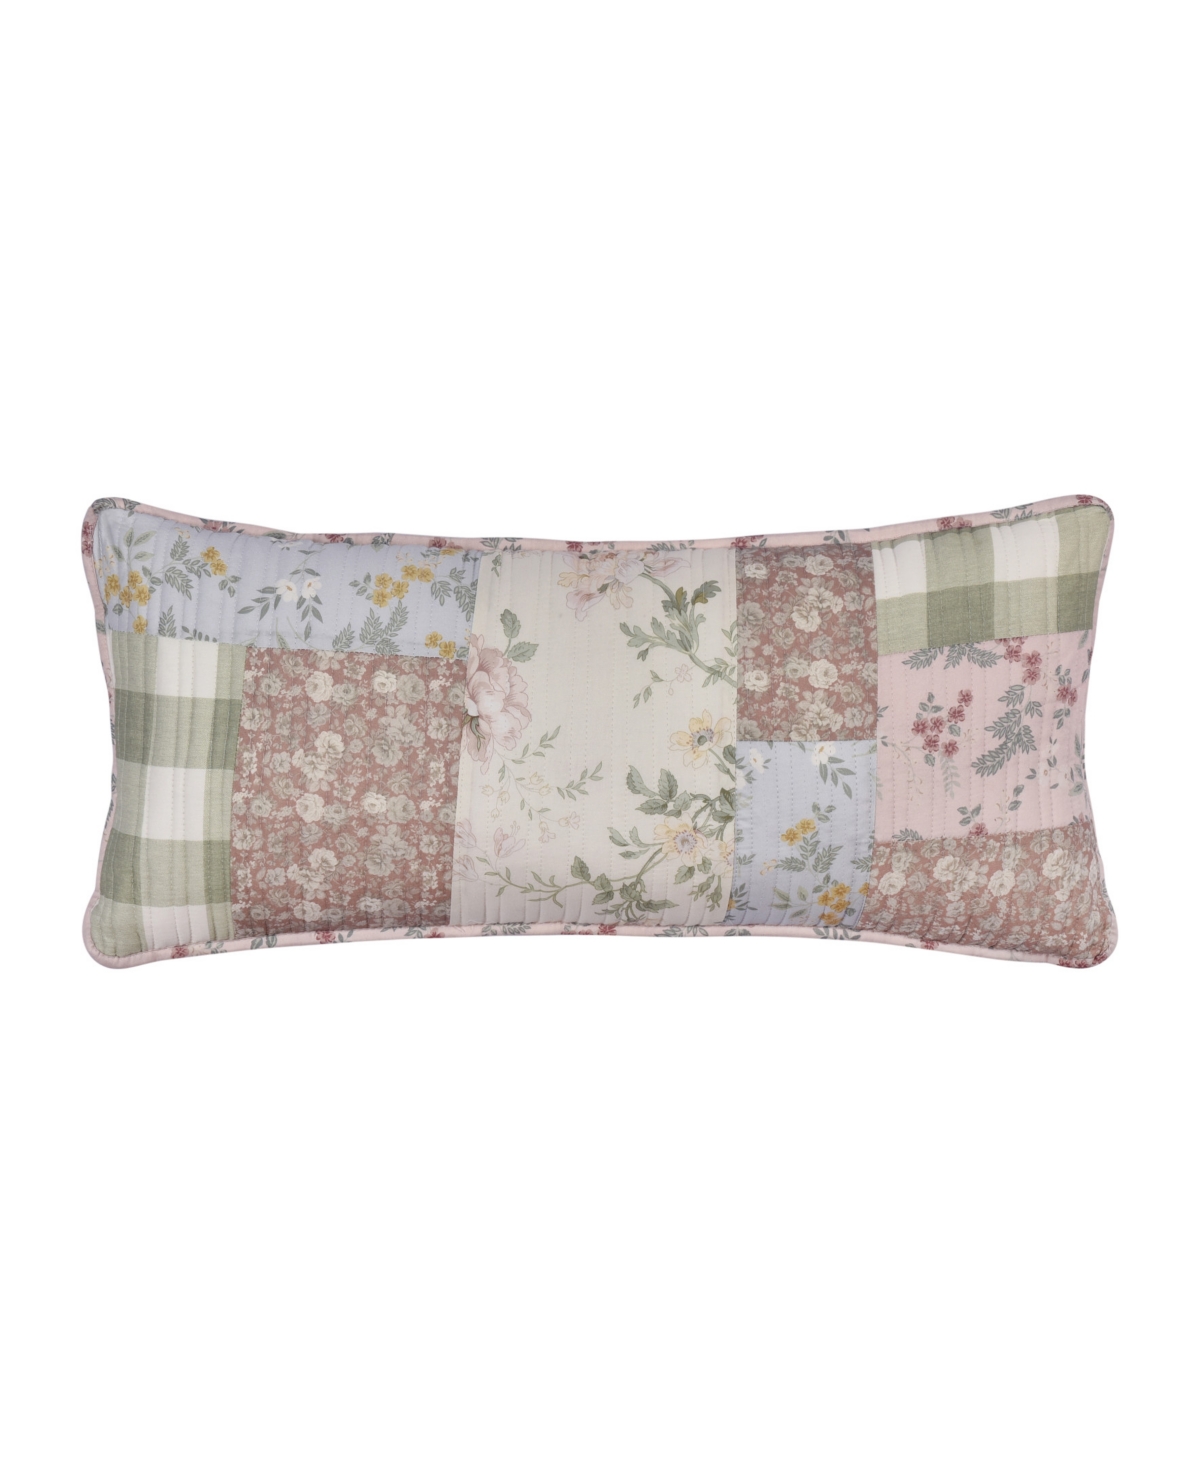 Piper & Wright Eloise Quilted Decorative Pillow, 12" X 24" In Dusty Rose